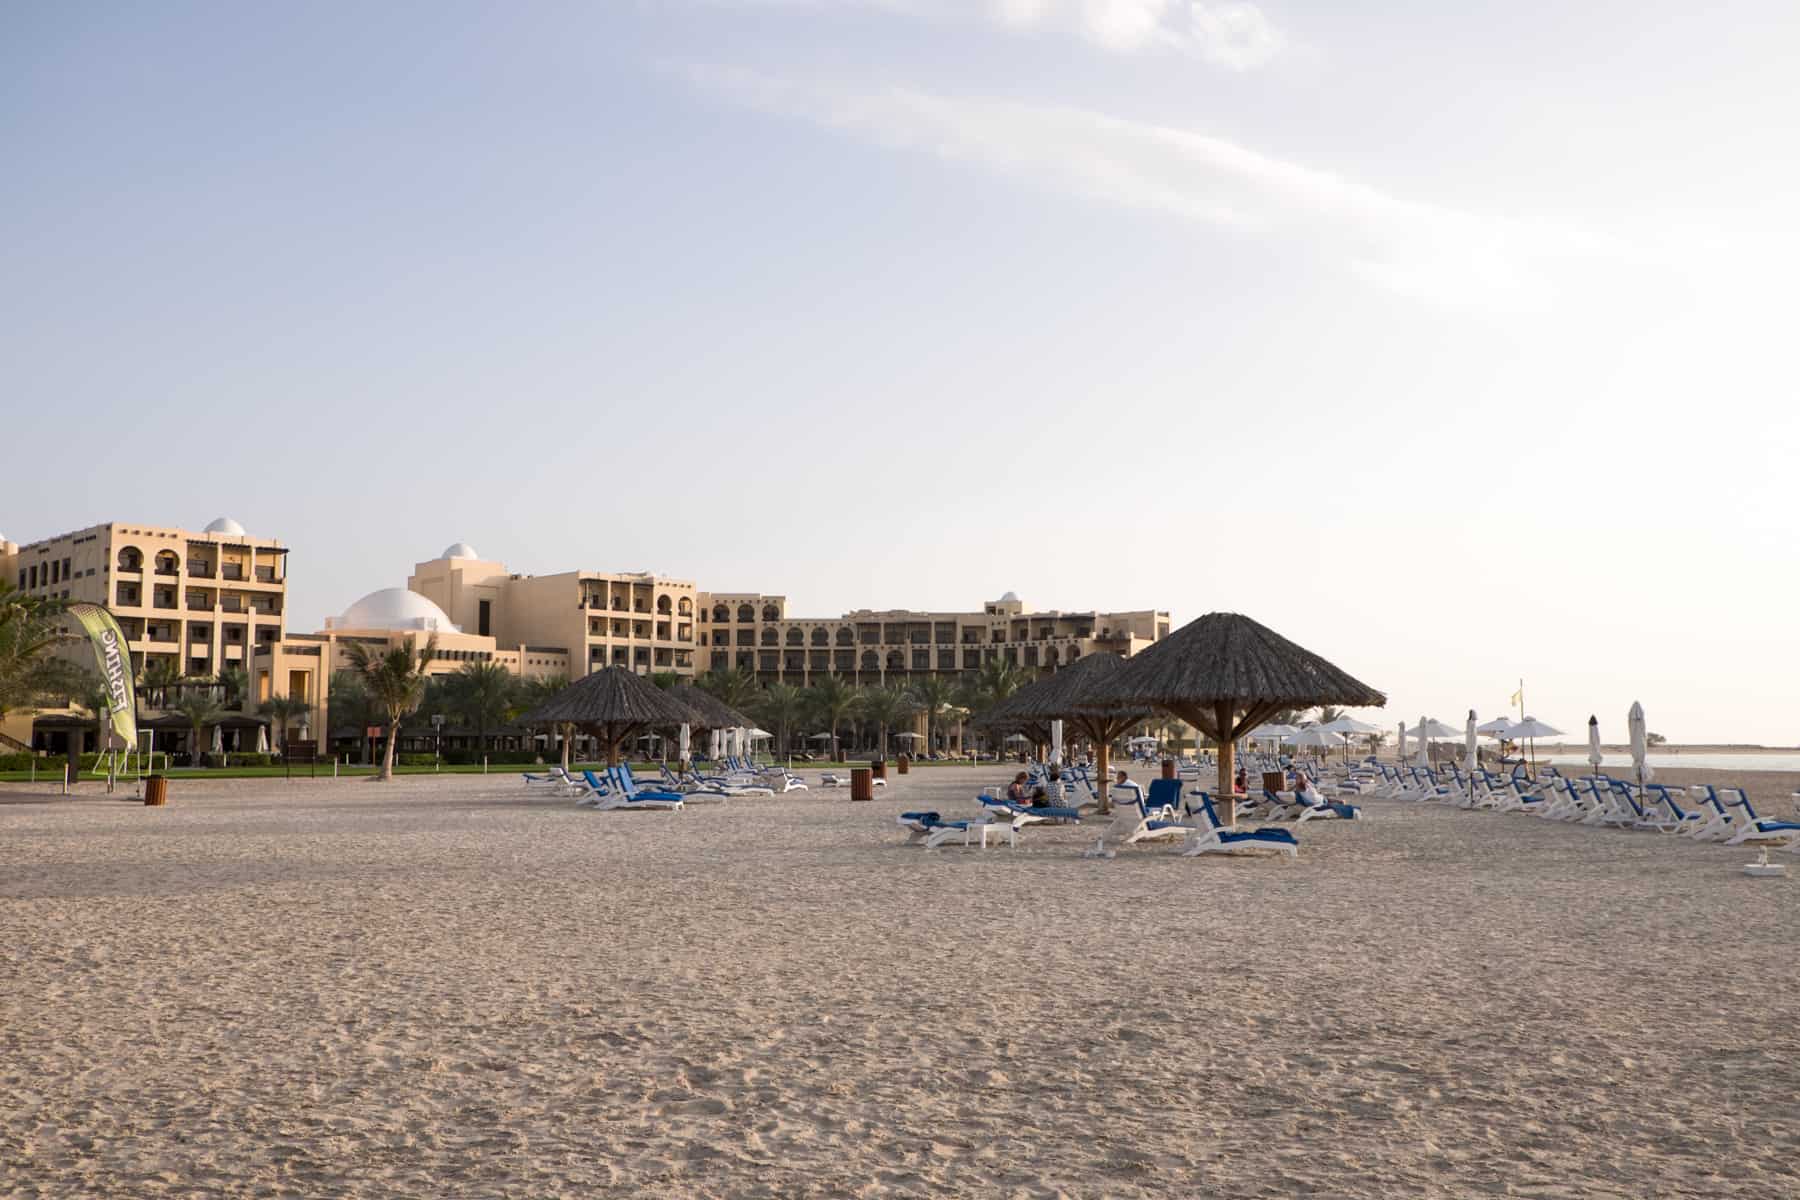 A sand coloured, low-rise hotel complex next to a sandy beach with wicker umbrella shades and blue covered sun loungers